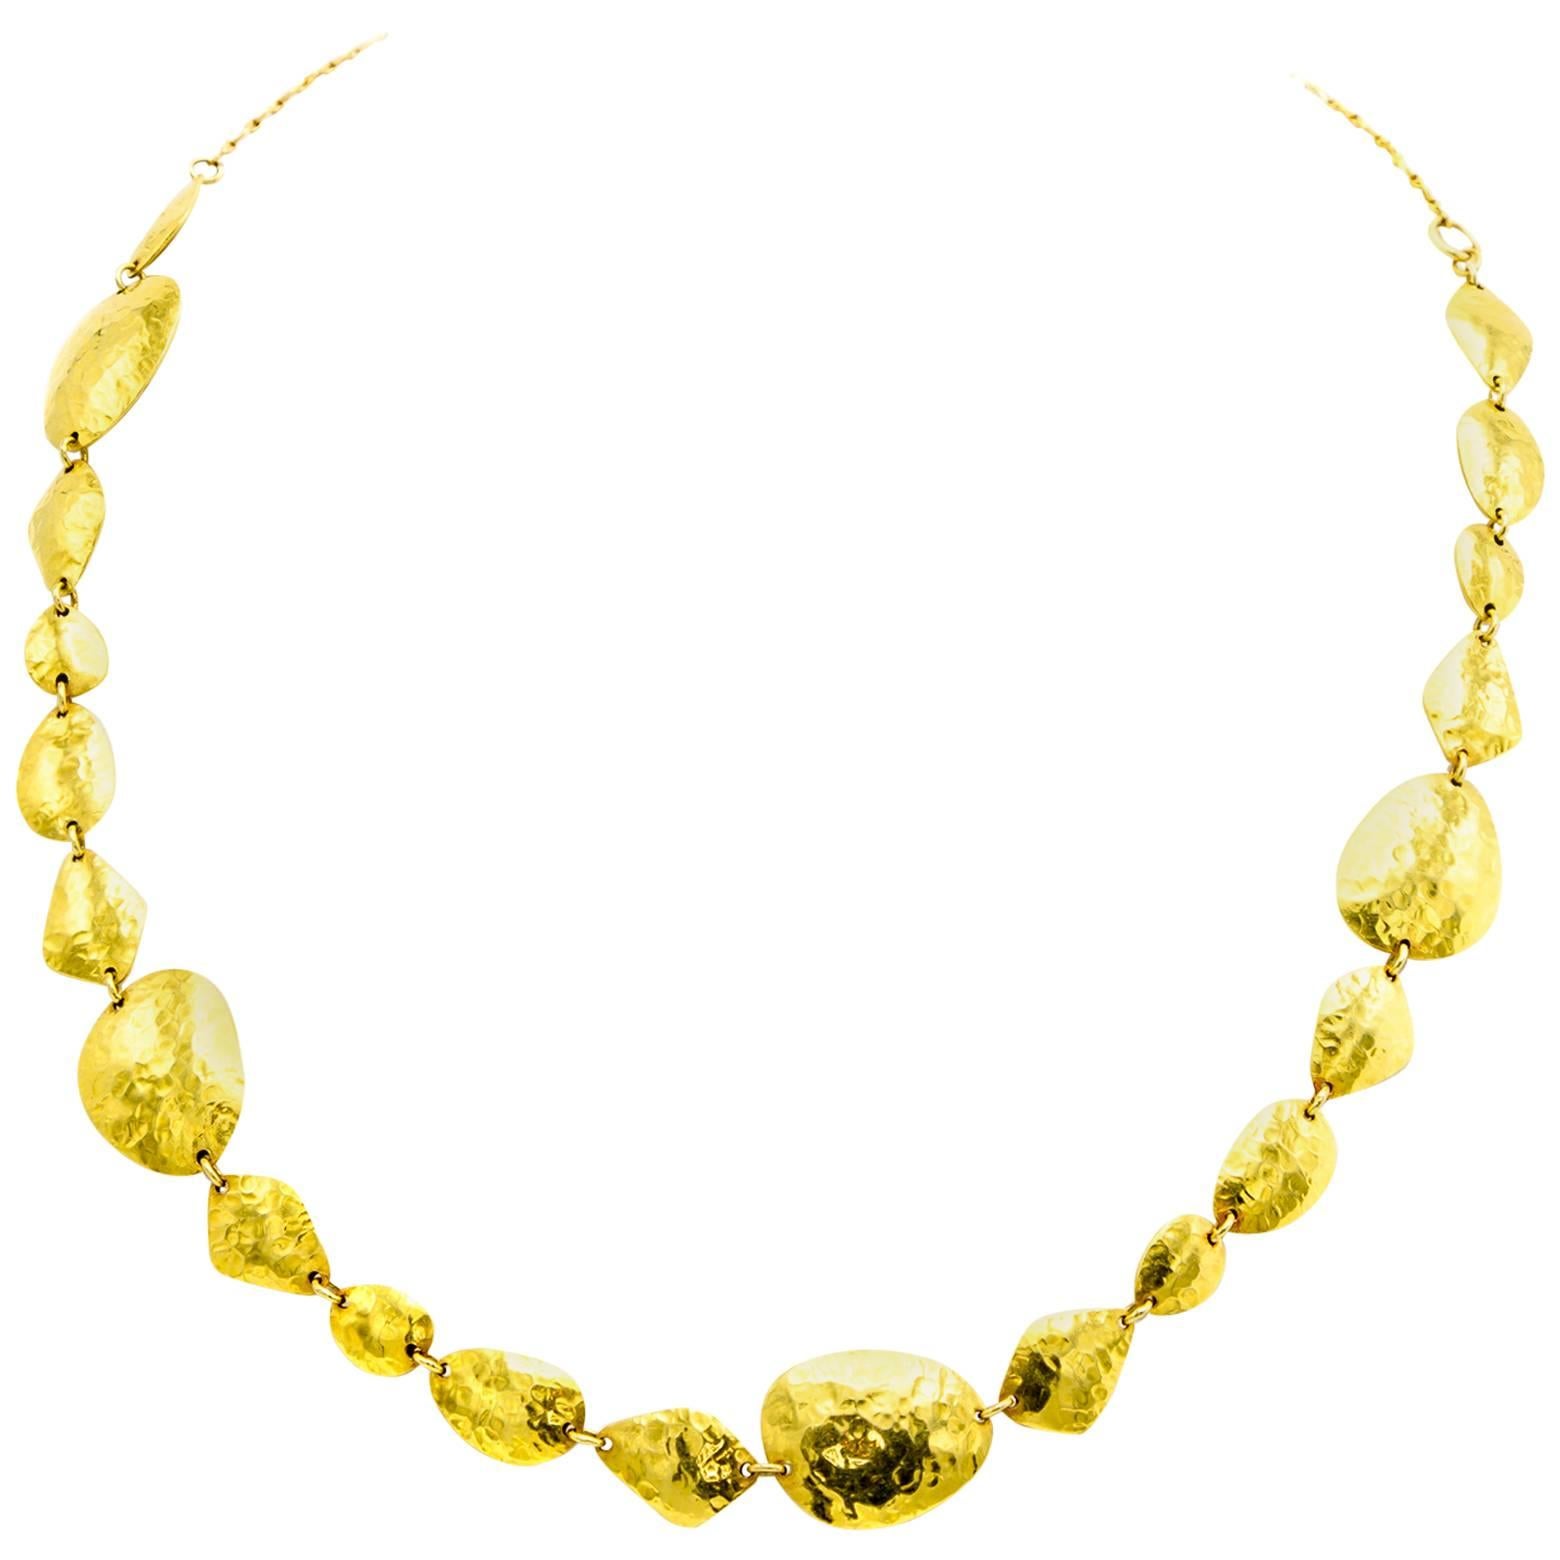 Architectual Gold Necklace with Various Shapes of Hammered Gold Links